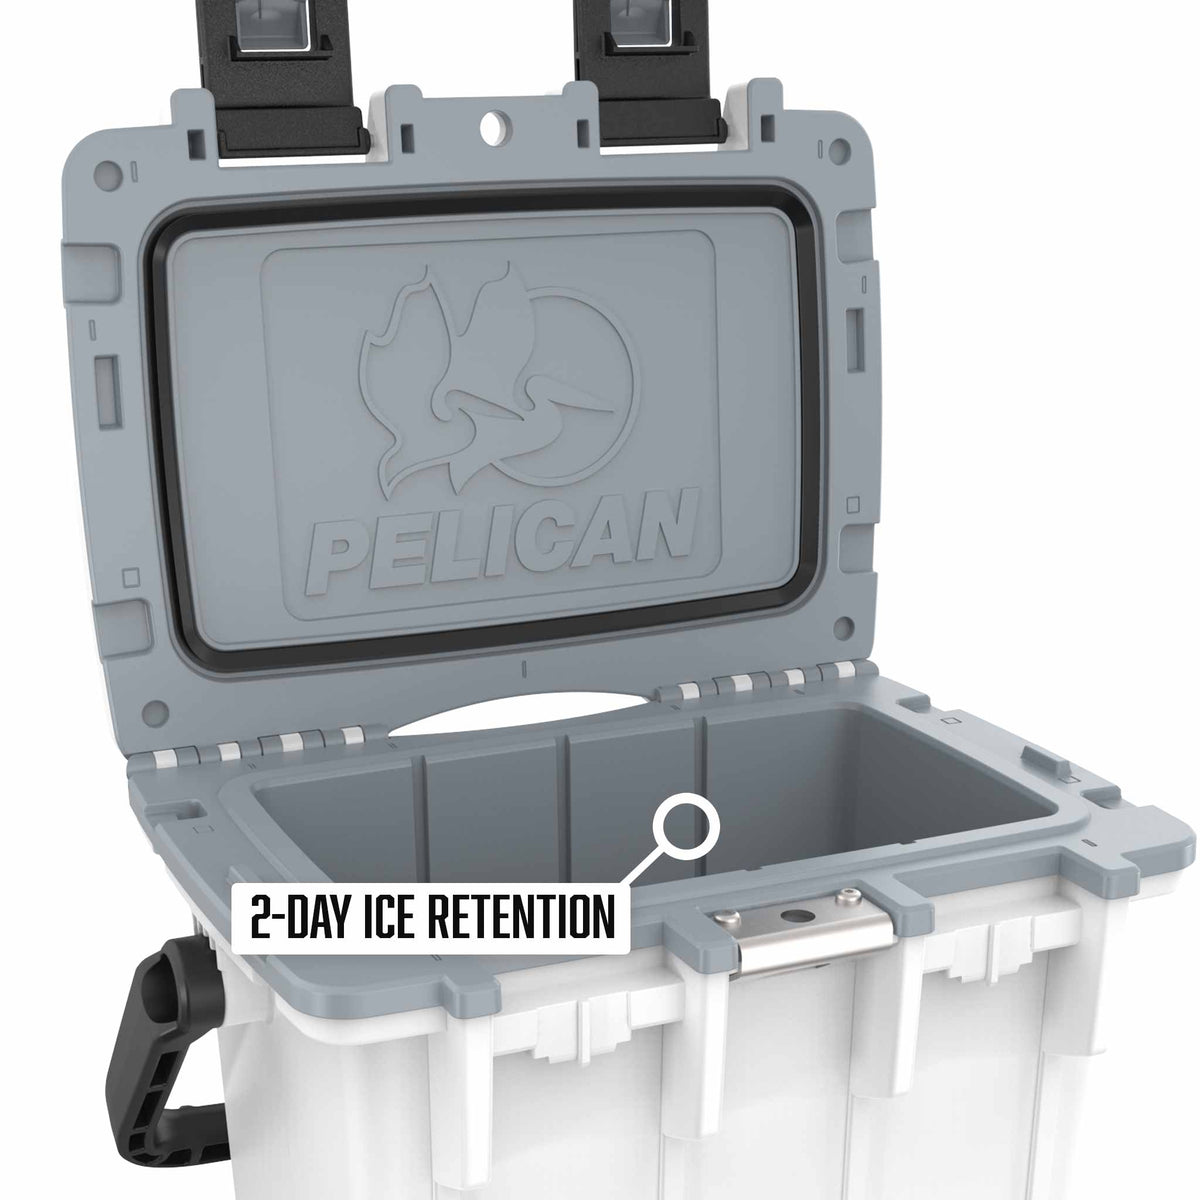 20QT Pelican Elite Cooler has up to 2 days of ice retention